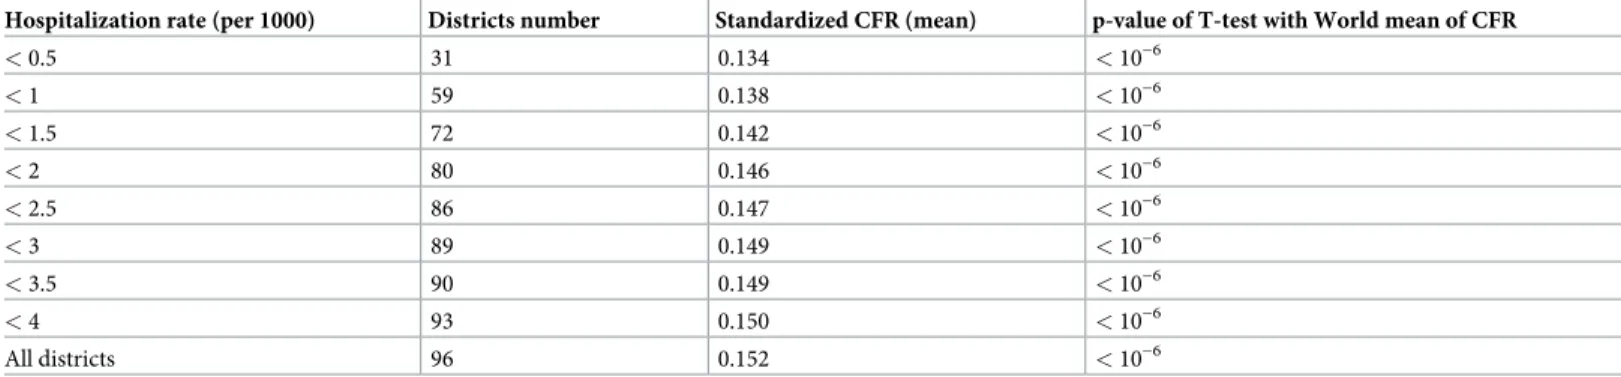 Table 5. Average standardized CFR as a function of hospitalization rate during the COVID-19 epidemic in France for the period of time between March 19 to May 8, 2020.